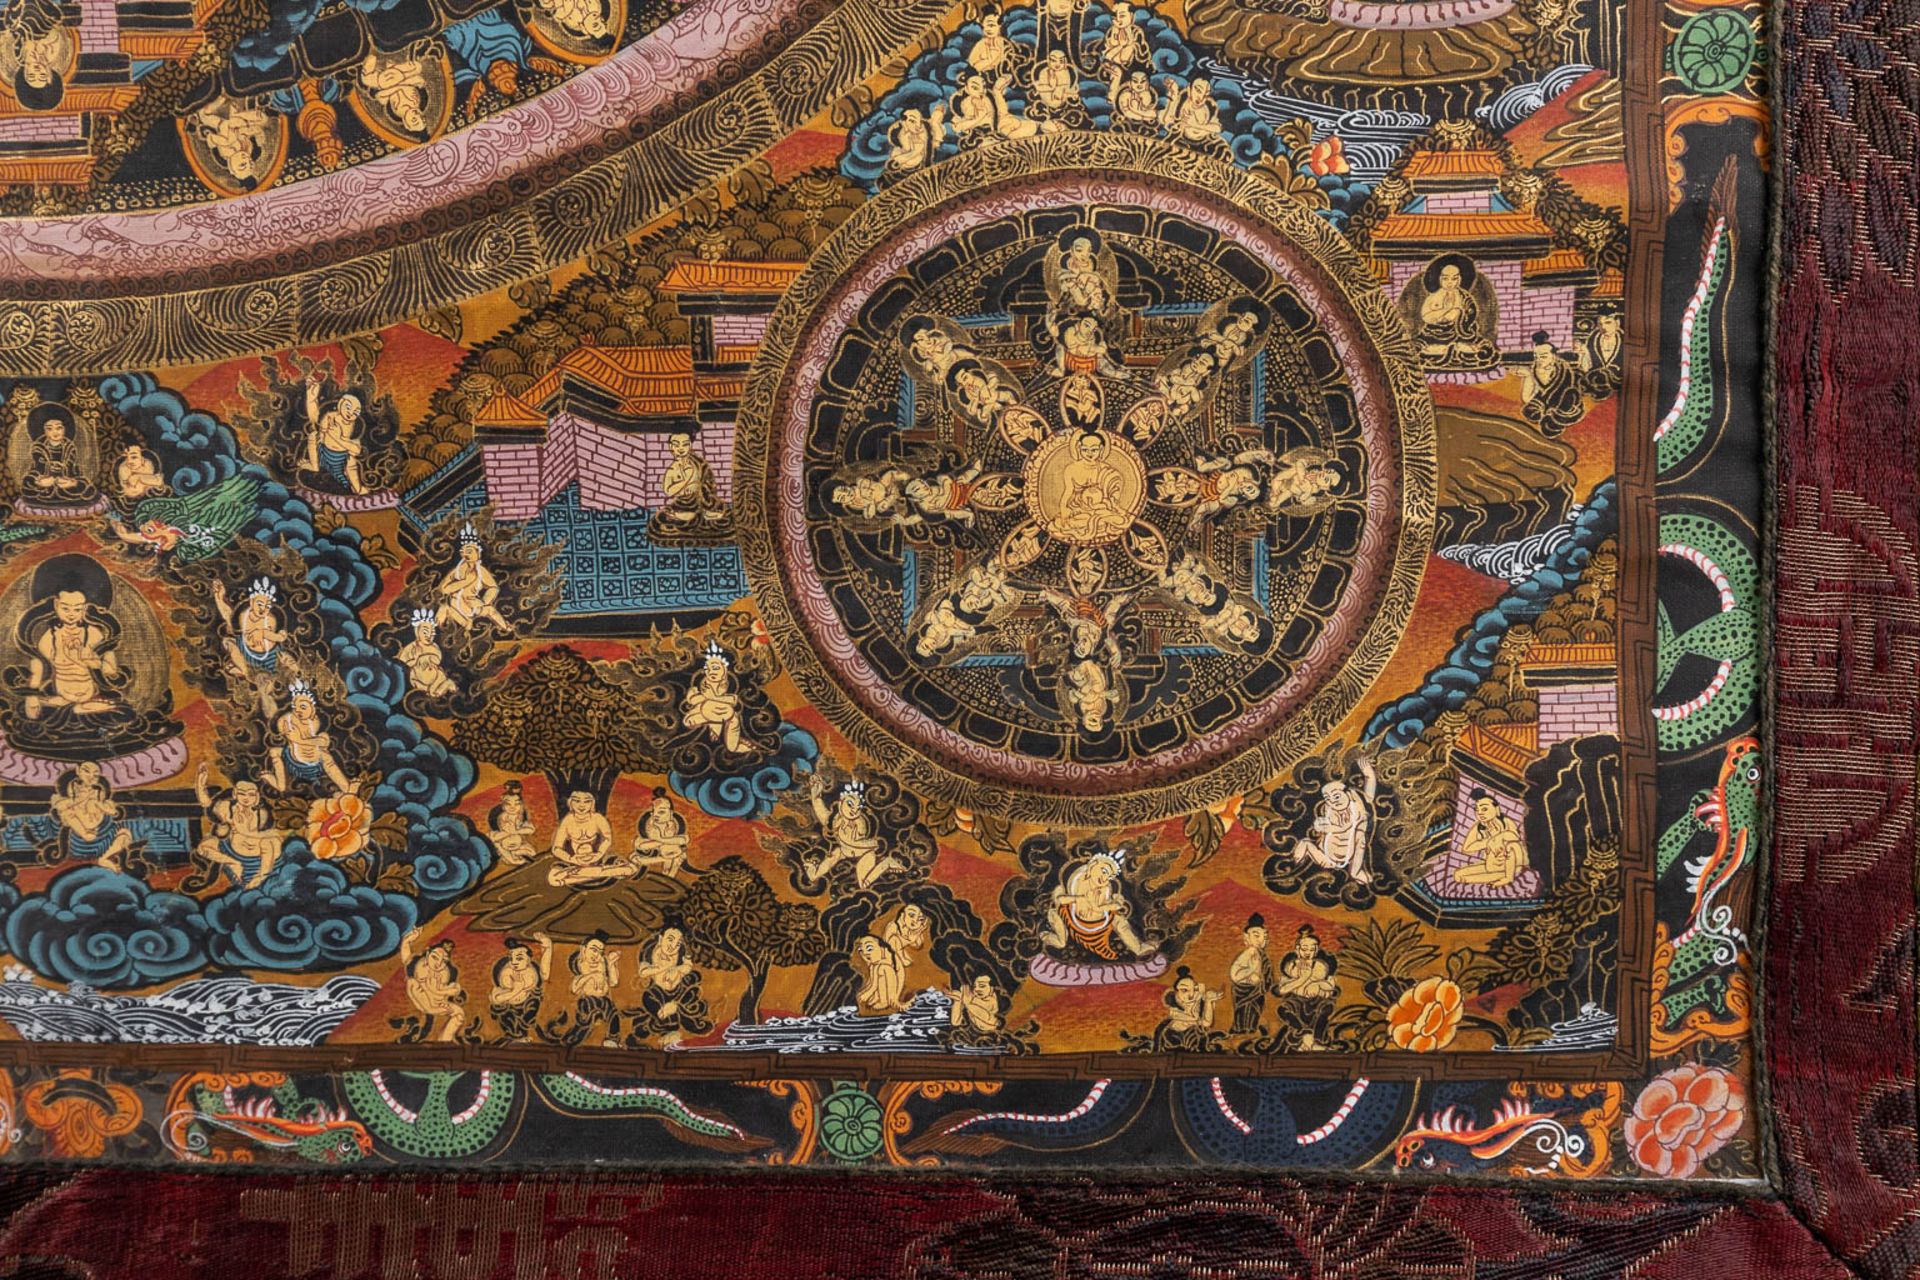 An Eastern Thangka, hand-painted decor on silk. (W:57 x H:74 cm) - Image 9 of 13